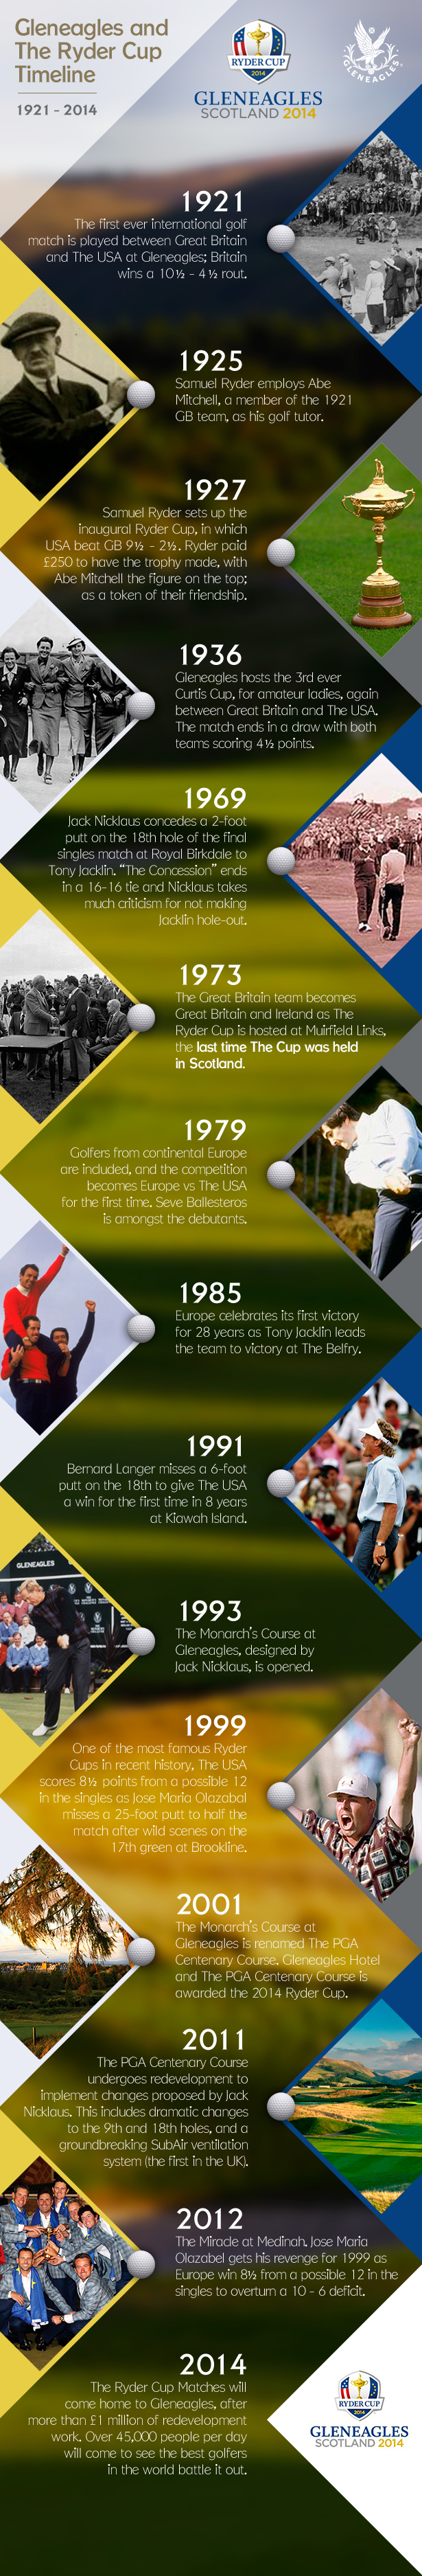 Ryder Cup Gleneagles time line inforgraphic